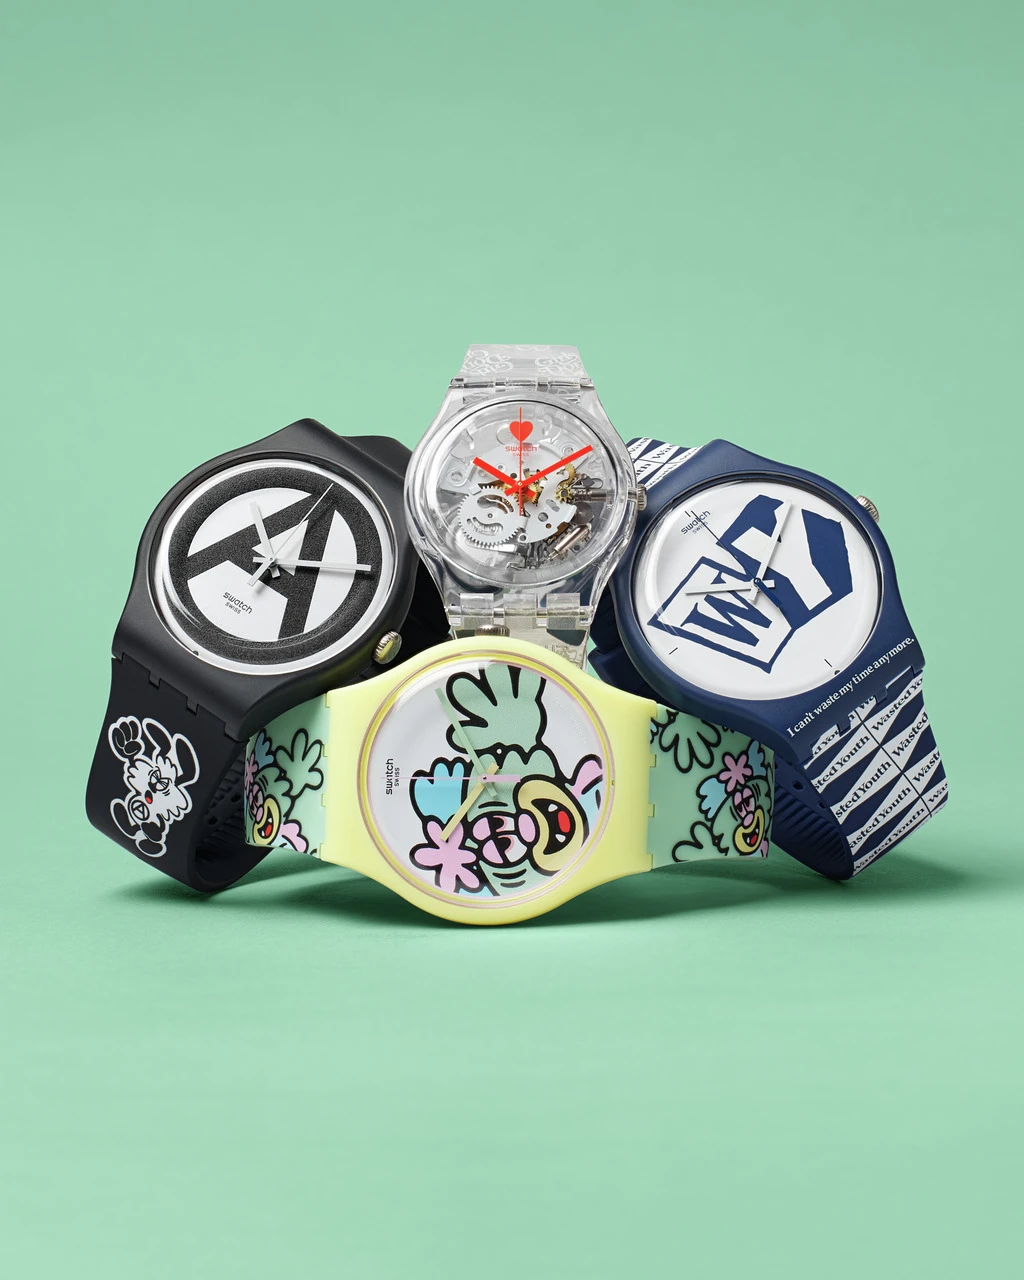 A collection of four unique and colorful wristwatches with artistic designs, displayed against a solid green background.